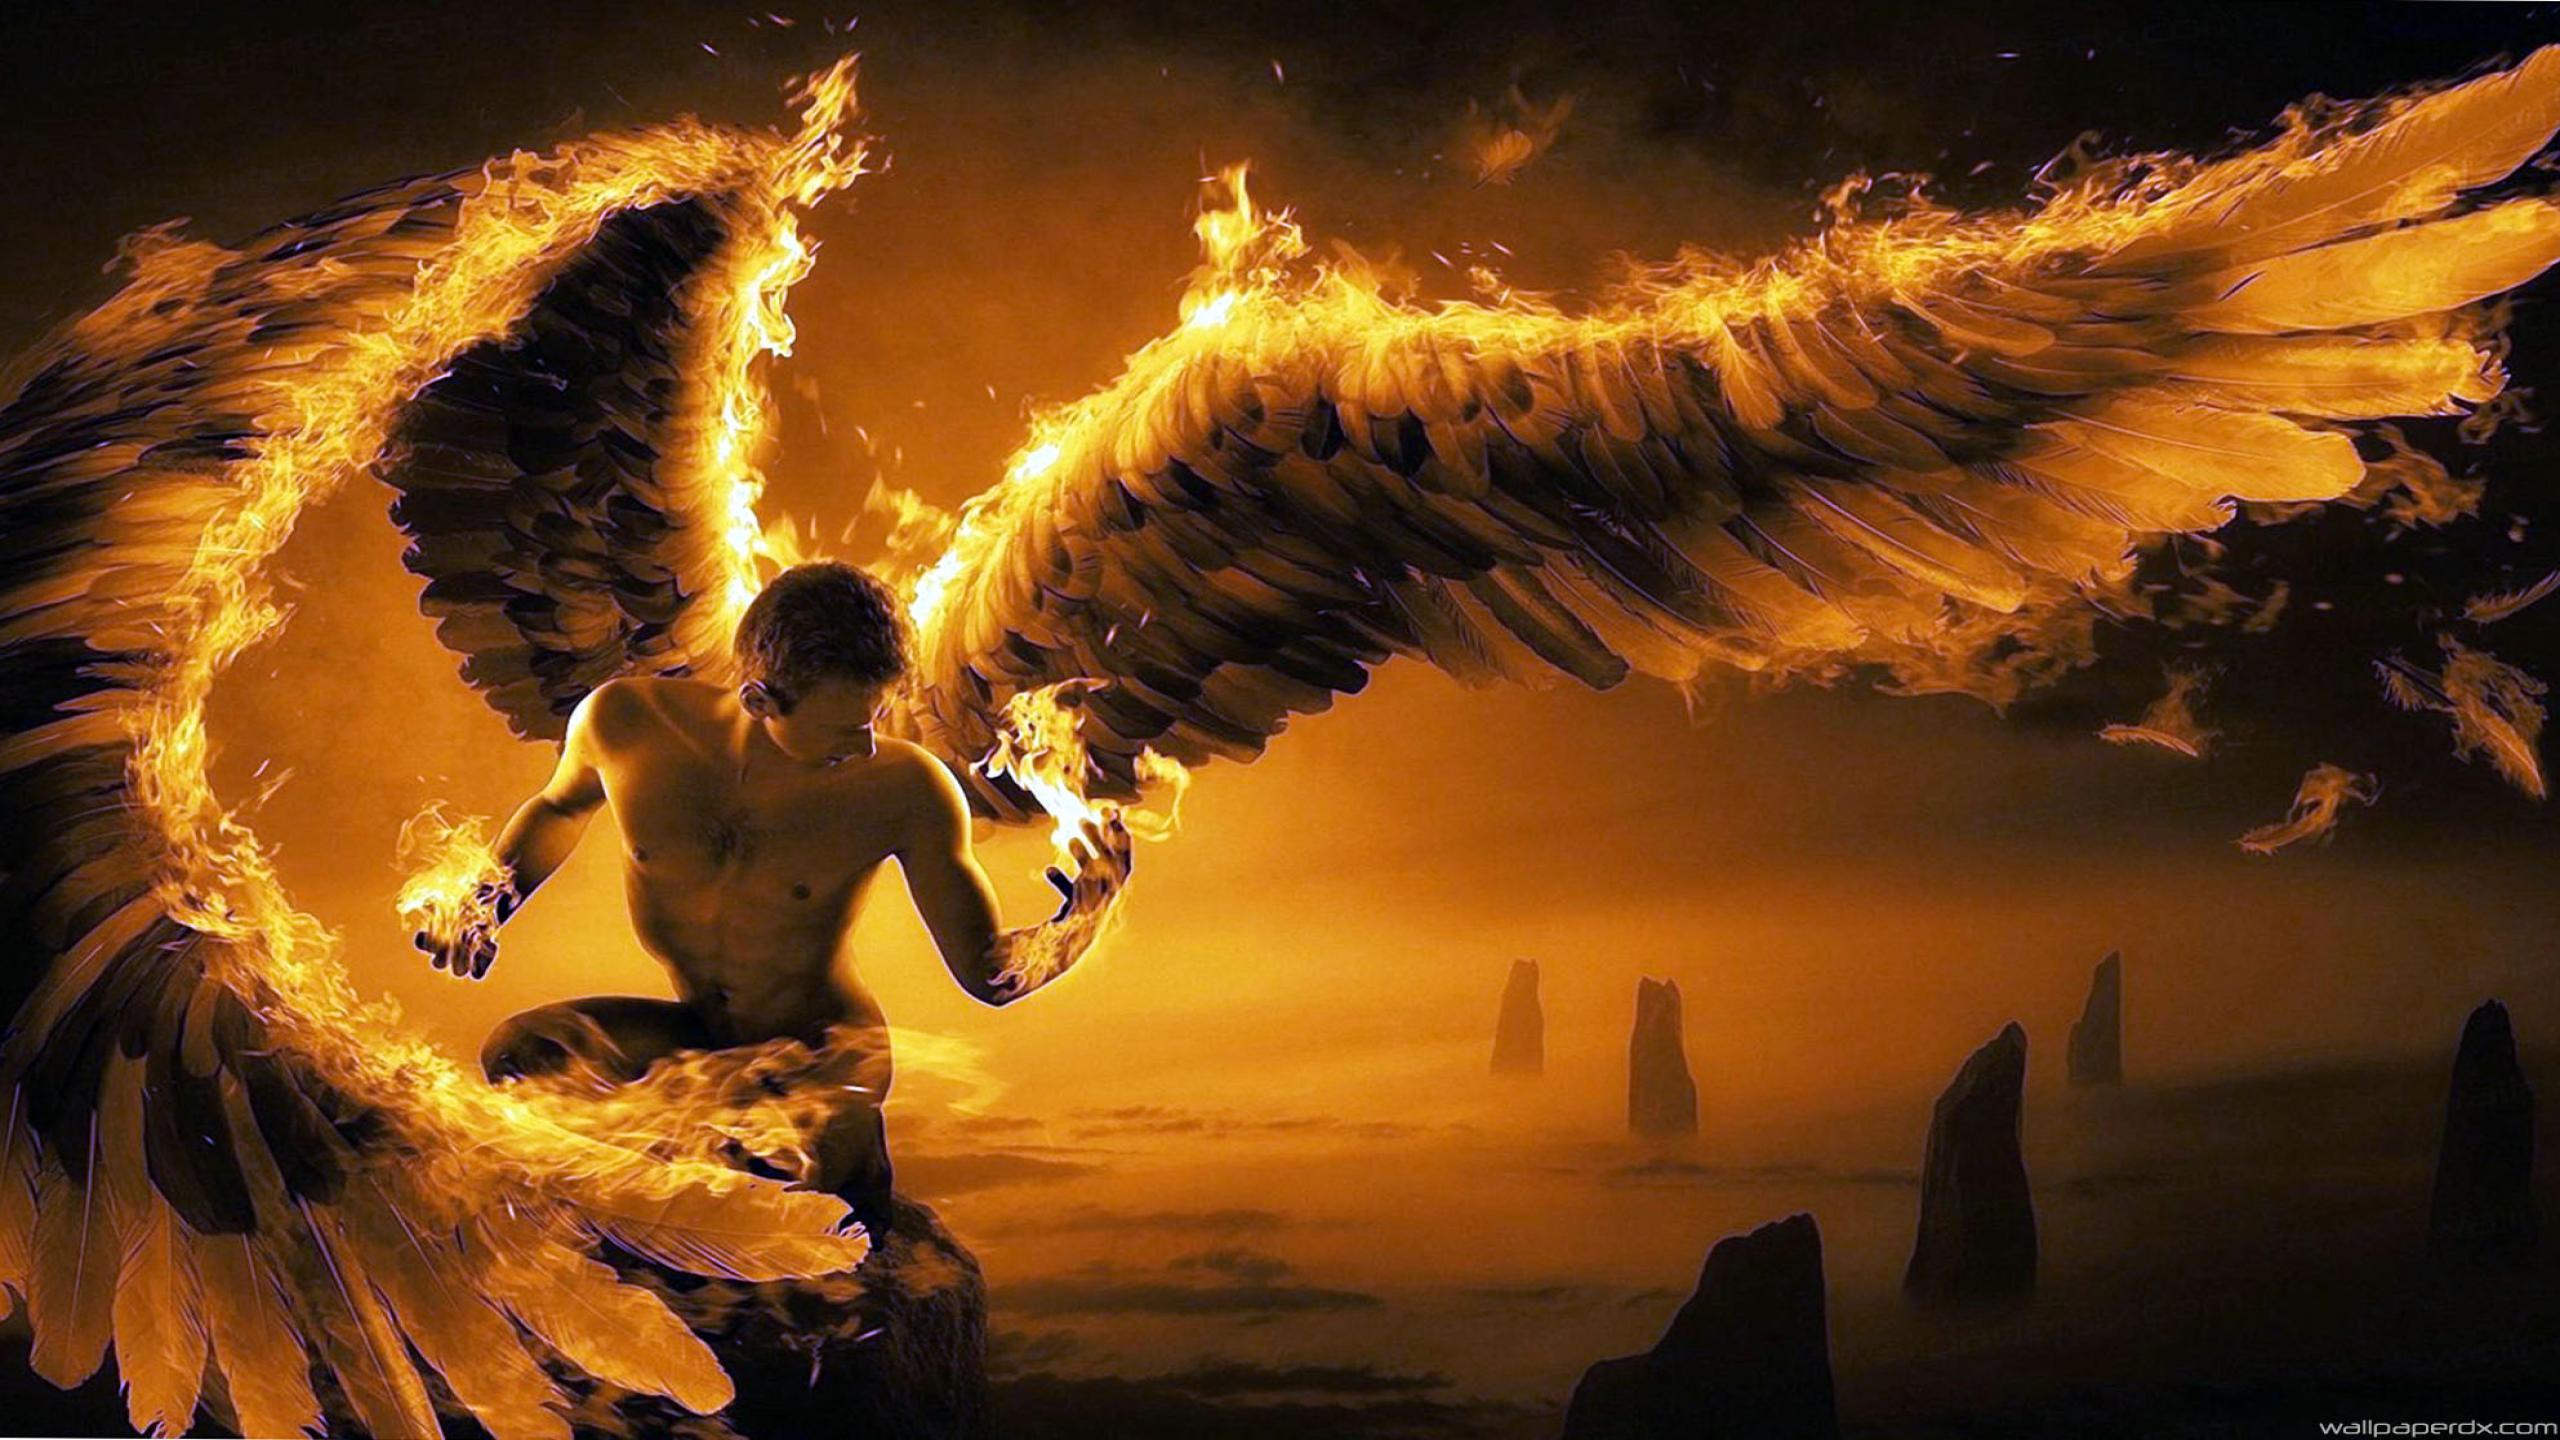 Hd Wings Of Fire For Editing - HD Wallpaper 